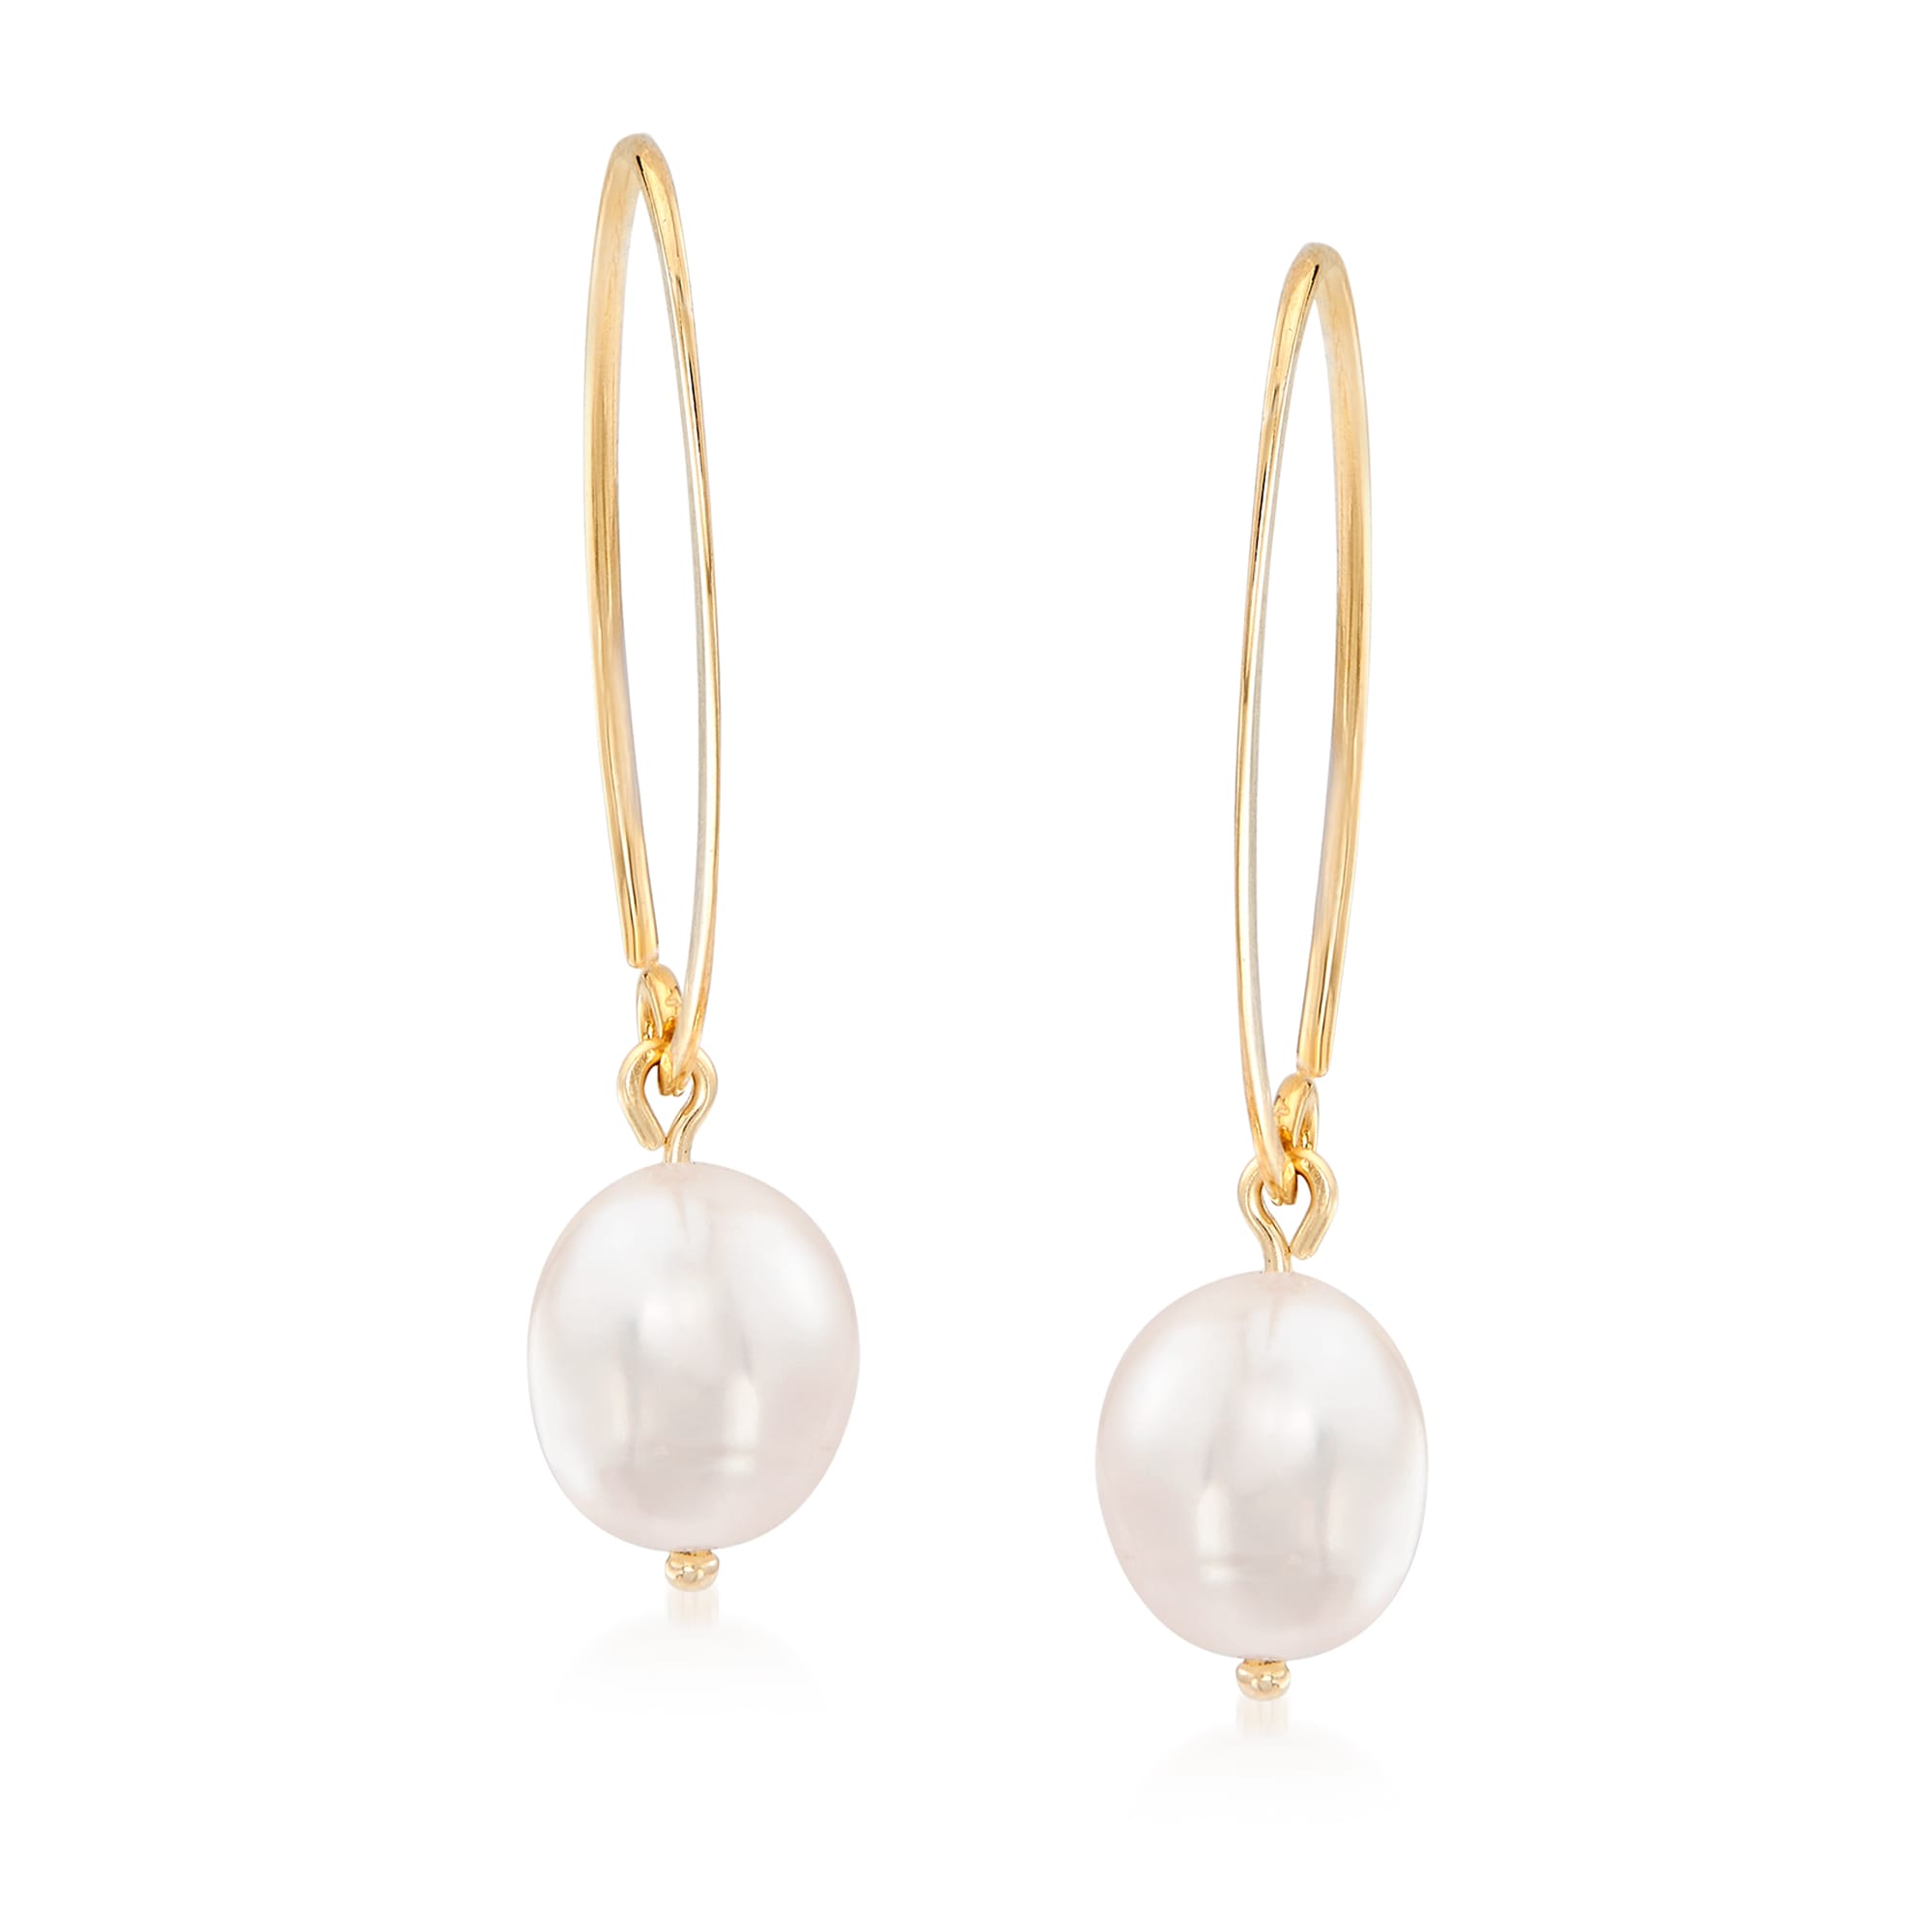 8mm Cultured Pearl Loop Earrings in 14kt Yellow Gold | Ross-Simons